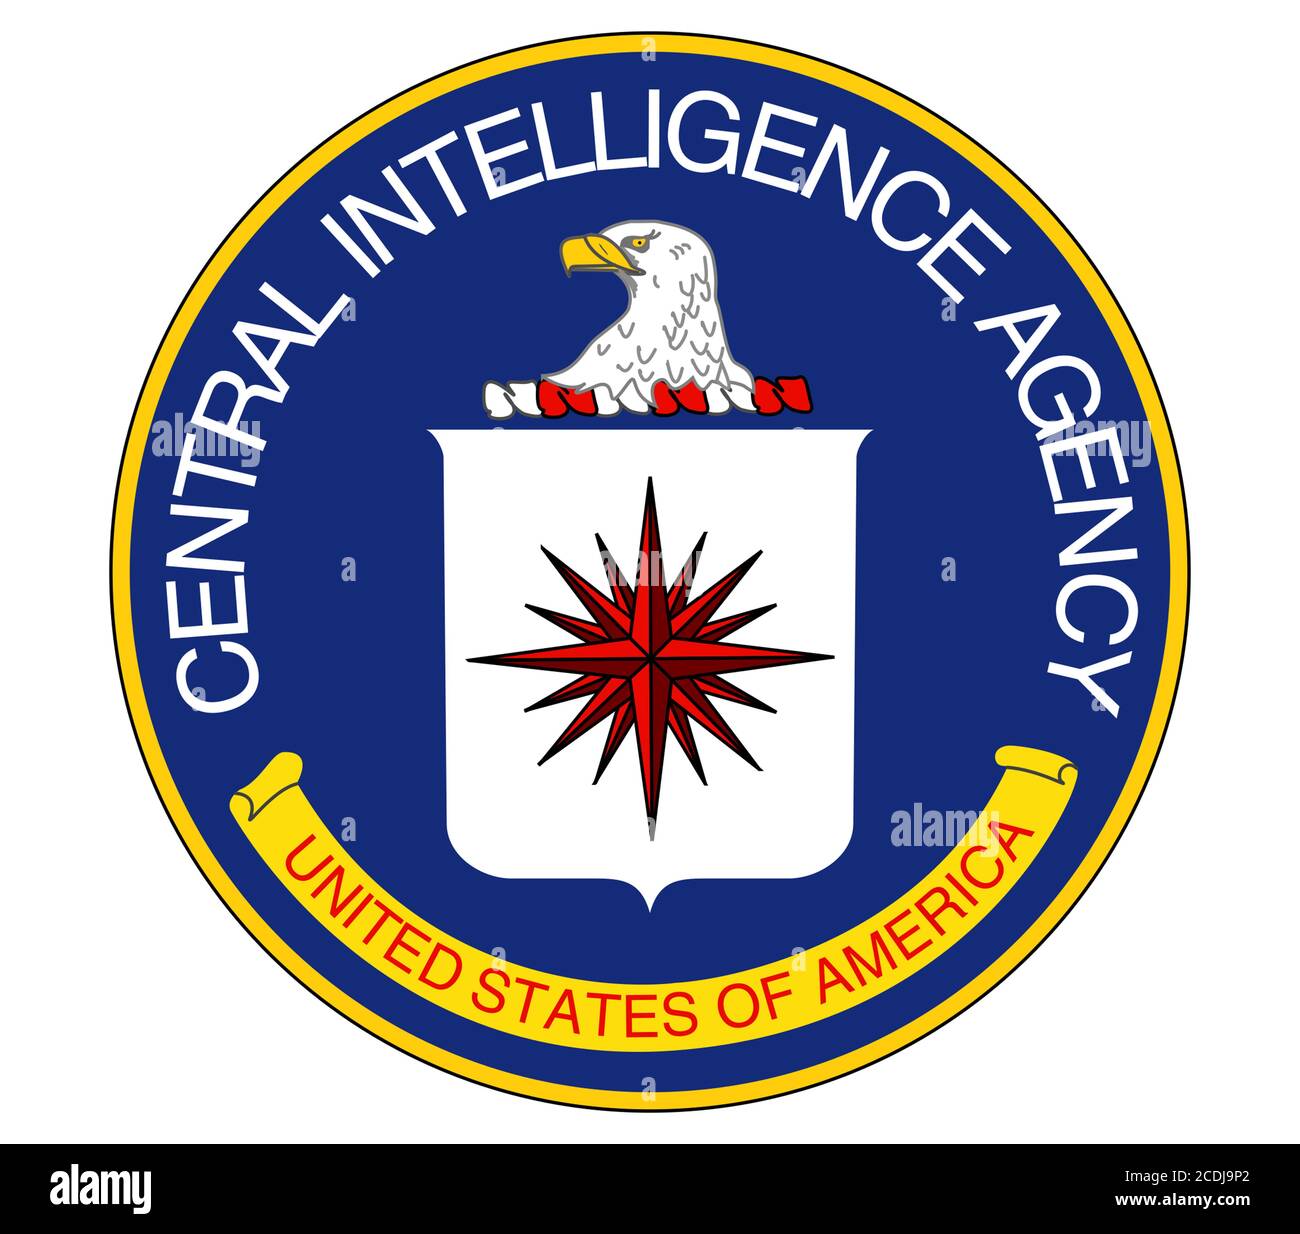 CIA, Central Intelligence Agency Banque D'Images